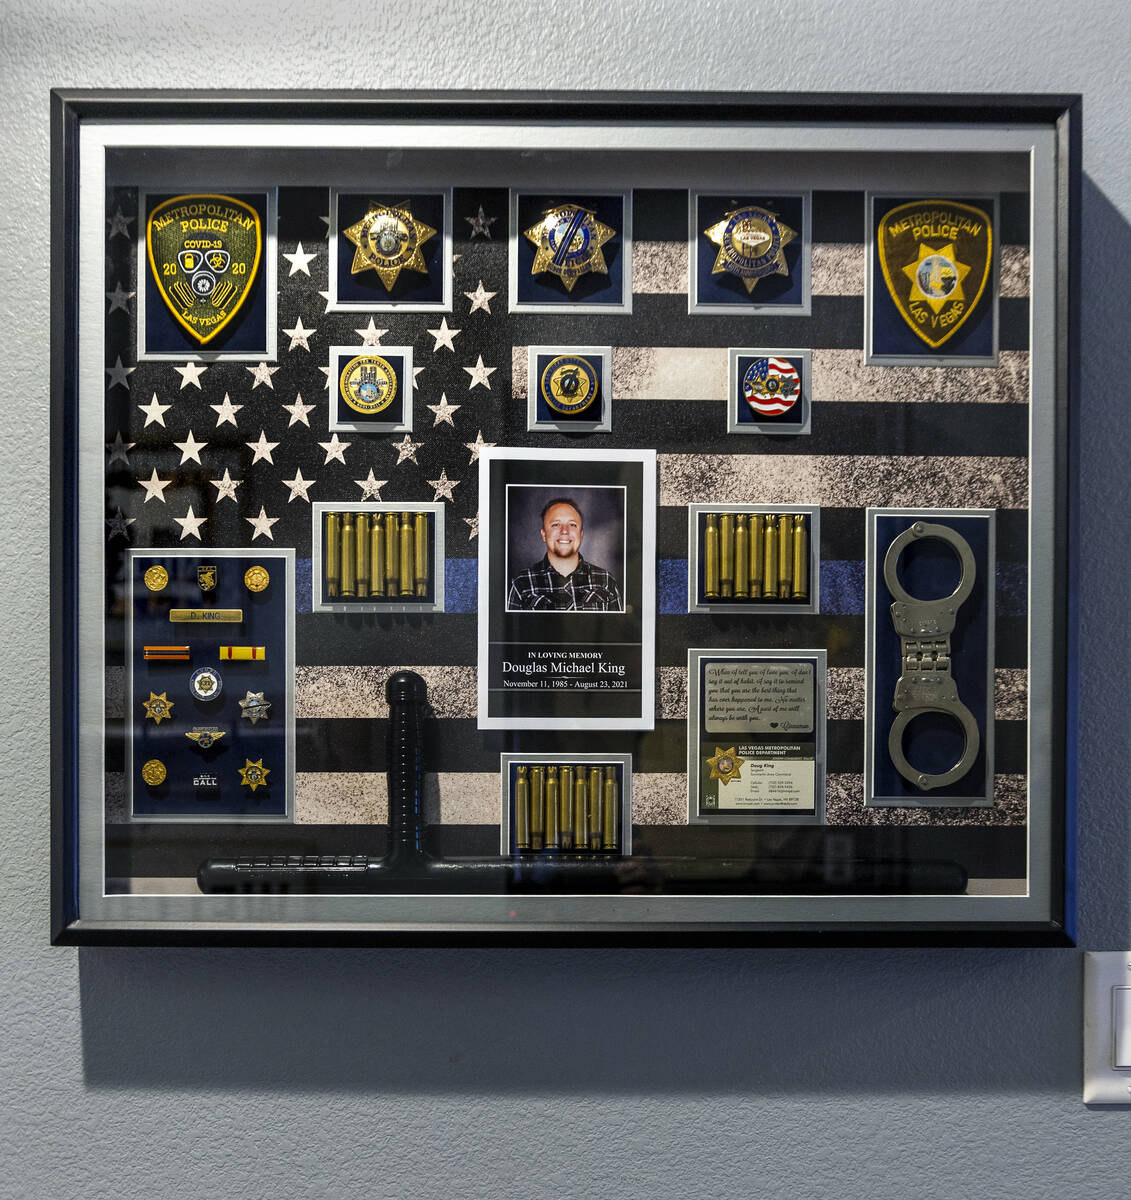 A framed memorial containing police memorabilia from Las Vegas police Sgt. Douglas King picture ...